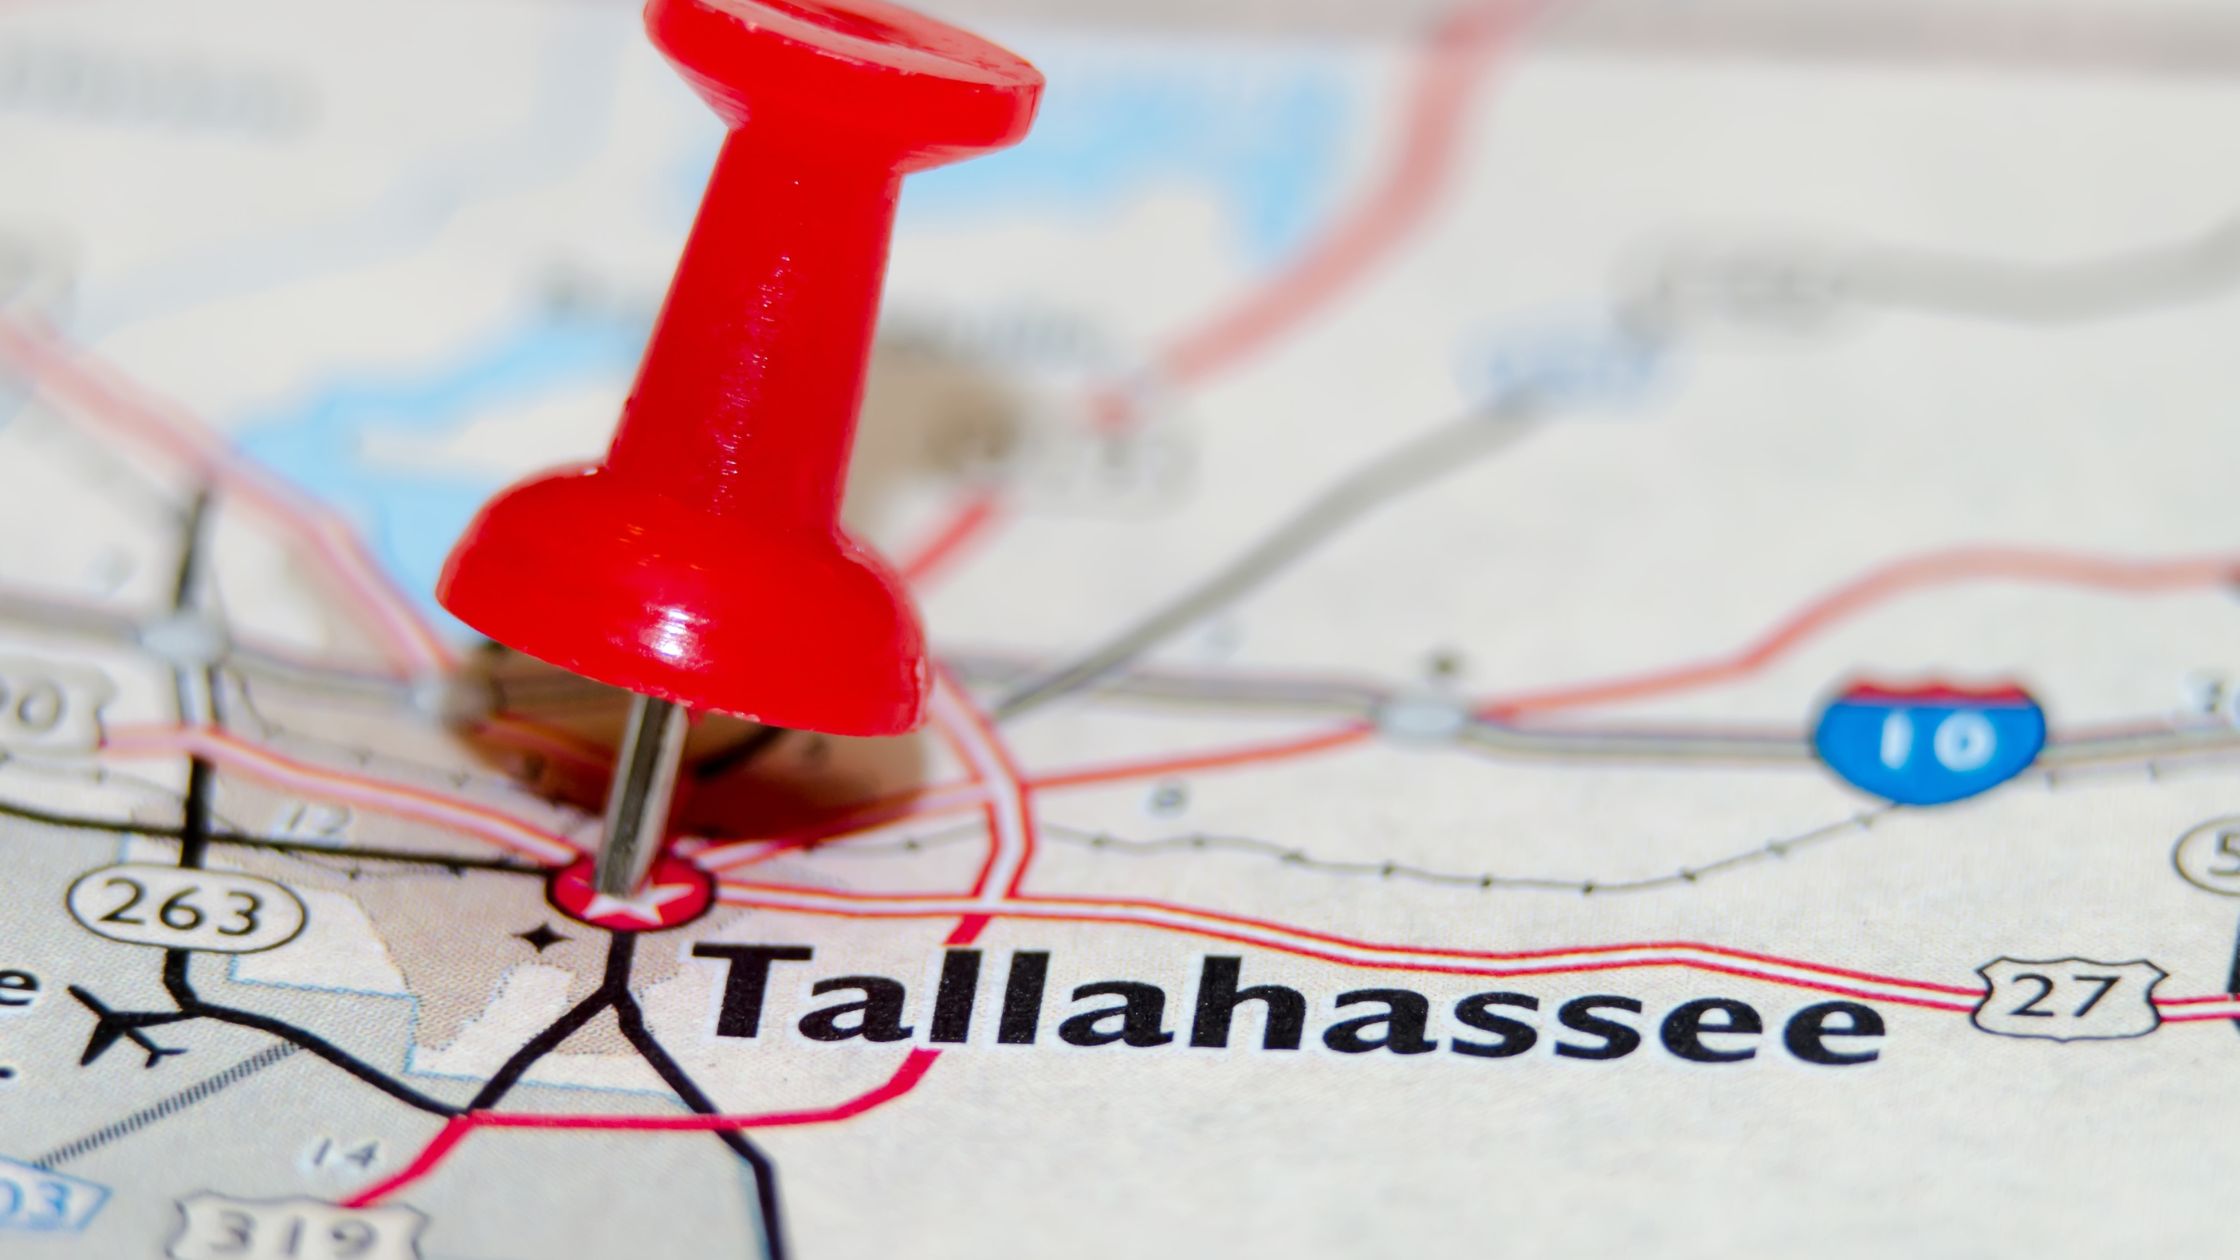 Tallahassee, The Capital City Of Florida